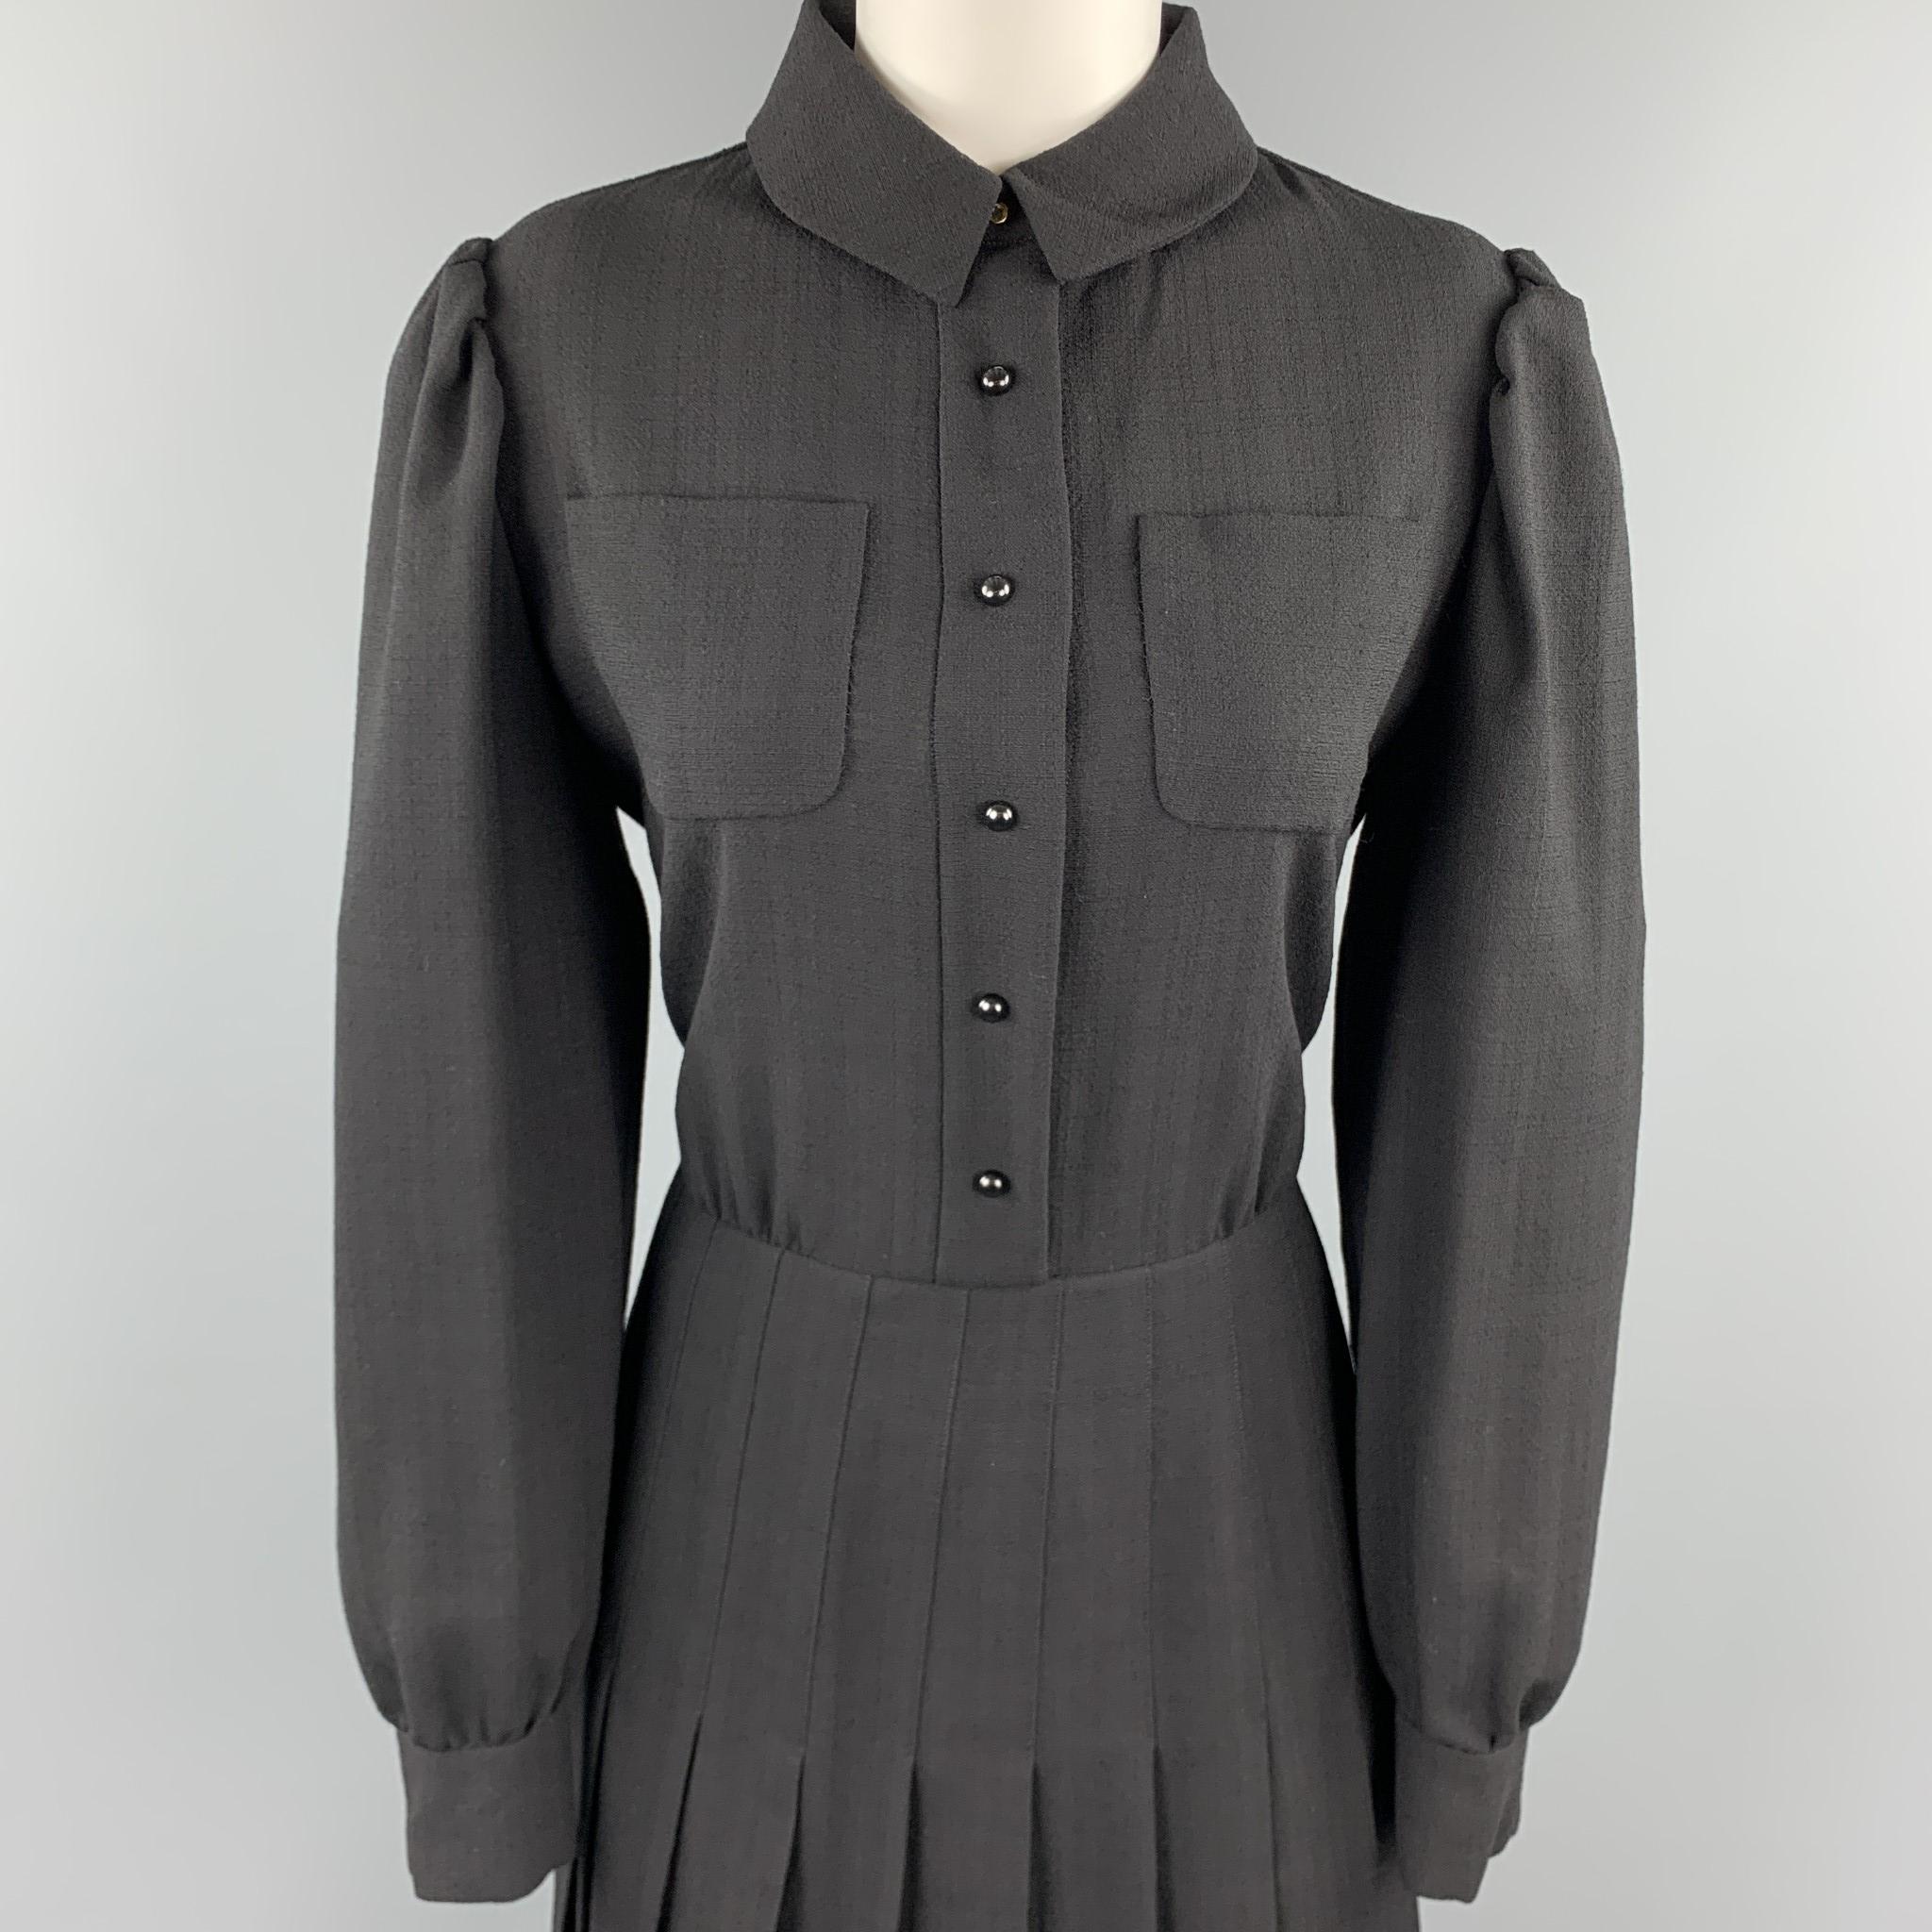 YVES SAINT LAURENT EDITION 24 shirt dress comes in black wool crepe with a pointed collar, puff sleeve, patch pocket blouse top and box pleated skirt bottom. 

Excellent Pre-Owned Condition.
Marked: EU 44

Measurements:

Shoulder: 15.5 in.
Bust: 42